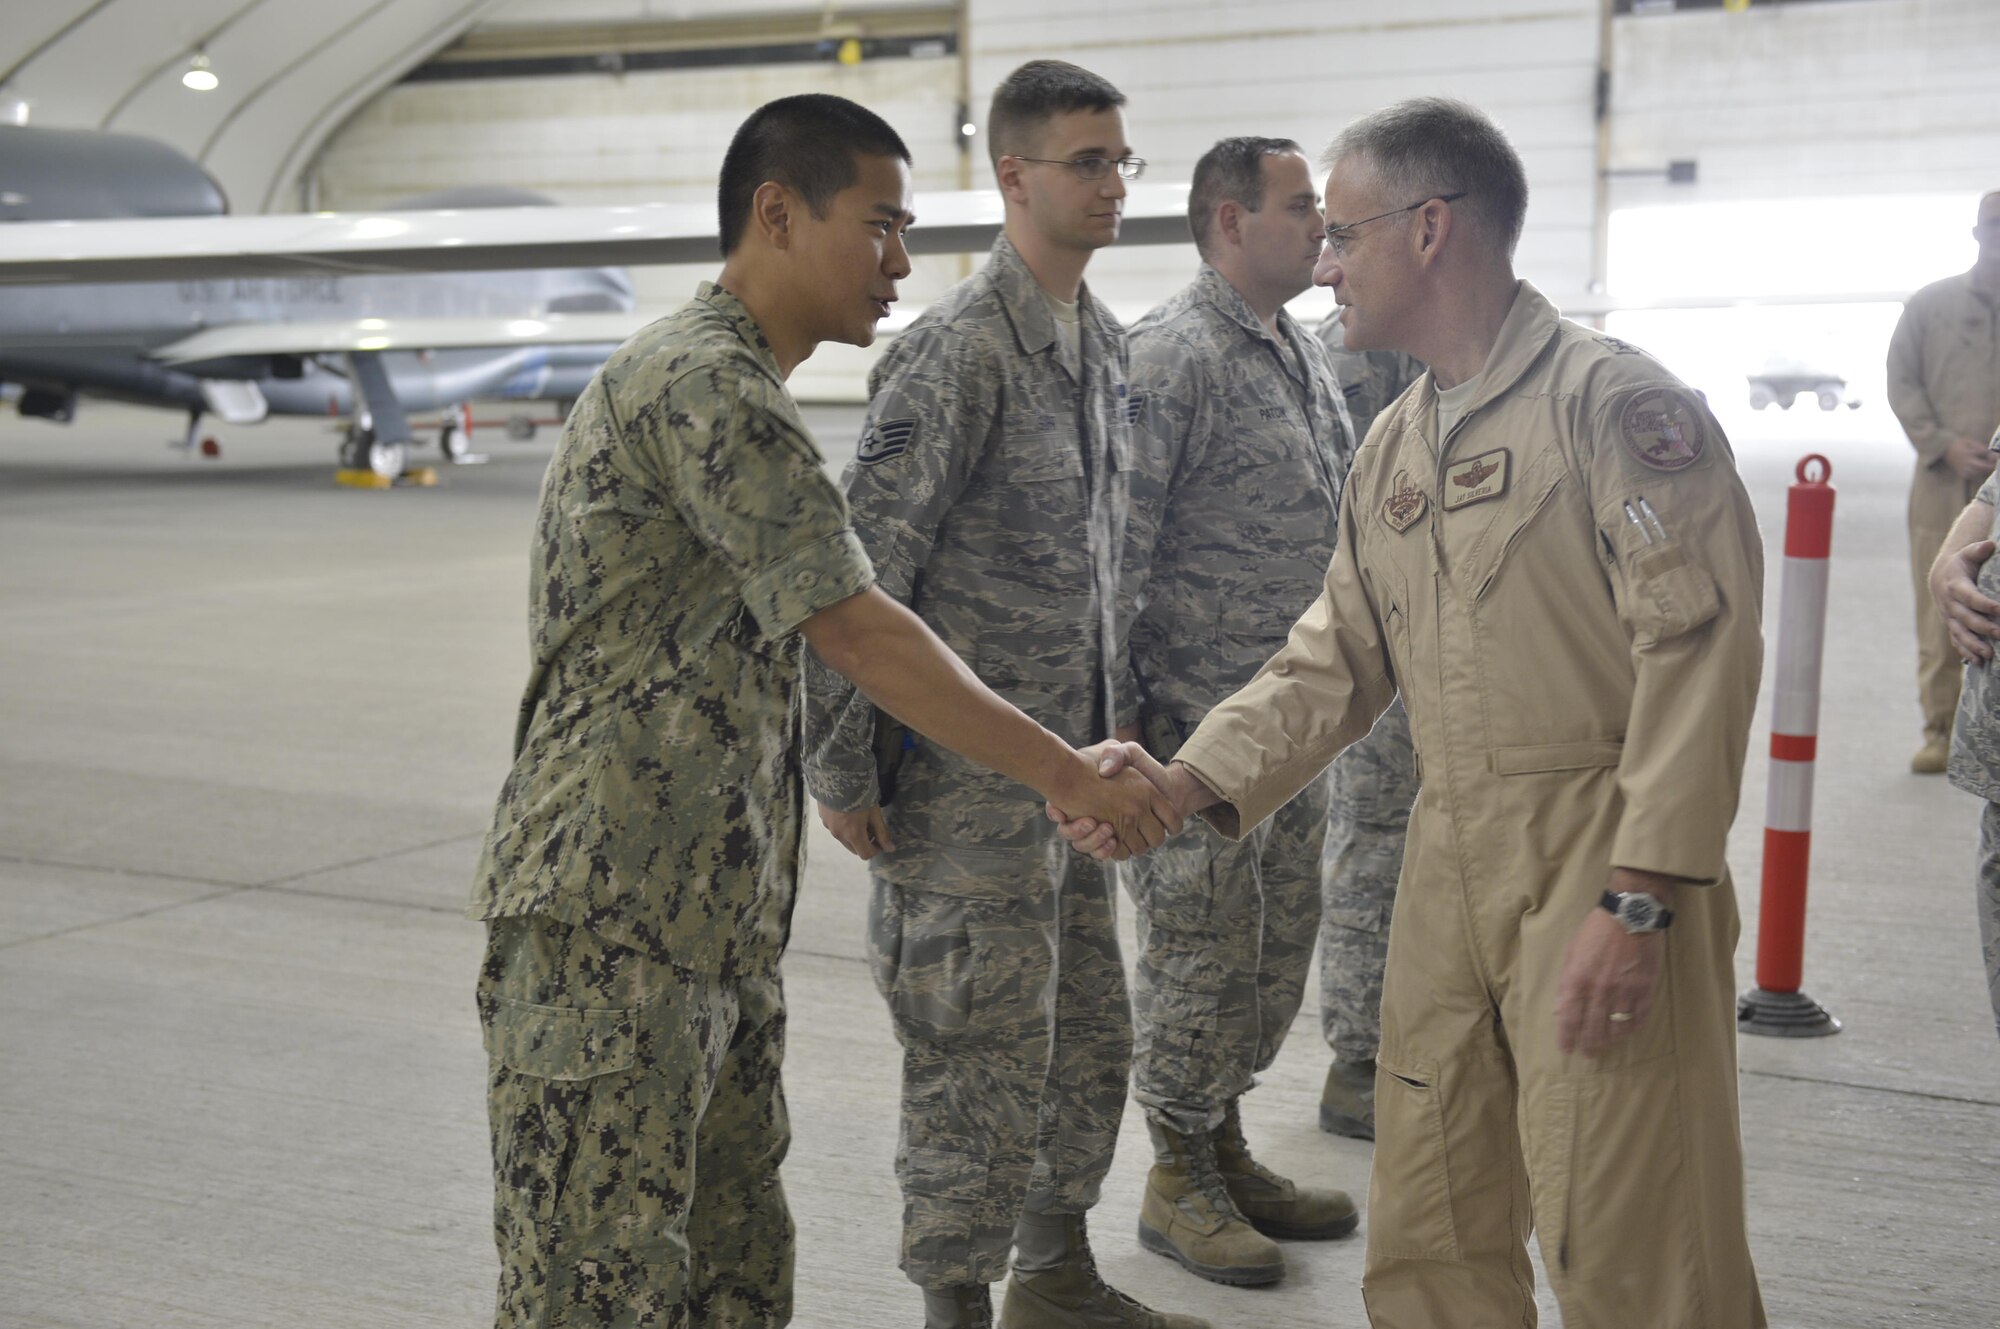 Maj. Gen. Jay Silveria, Deputy Commander, Combined Air Force Air Component, U.S. Central Command, shakes hands with U.S. Navy Lt. Cmdr. Long, 380th Expeditionary Aircraft Maintenance Squadron, during a tour of the Global Hawk facility at an undisclosed location in Southwest Asia June 18. Silveria toured several facilities and interacted with the men and women behind the 380th Air Expeditionary Wing mission. (U.S. Air Force photo by Tech. Sgt. Chad Warren)